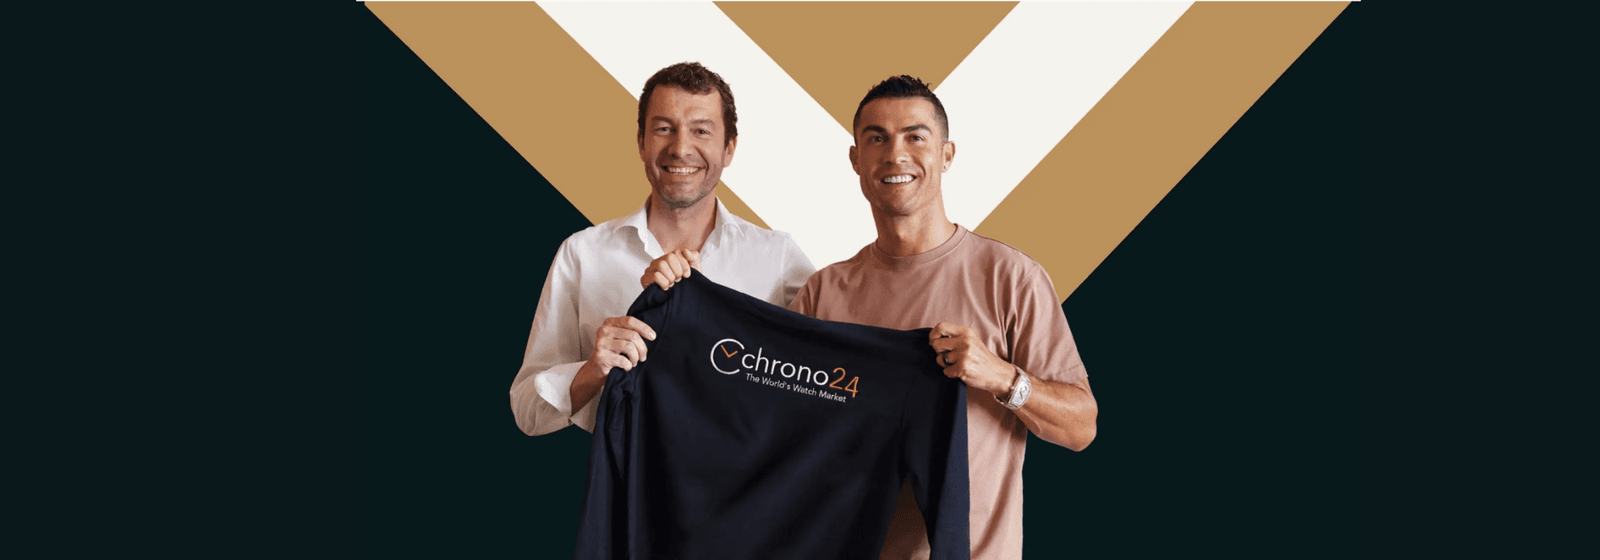 Christiano Ronaldo Invests In Second-Hand Marketplace Chrono24!